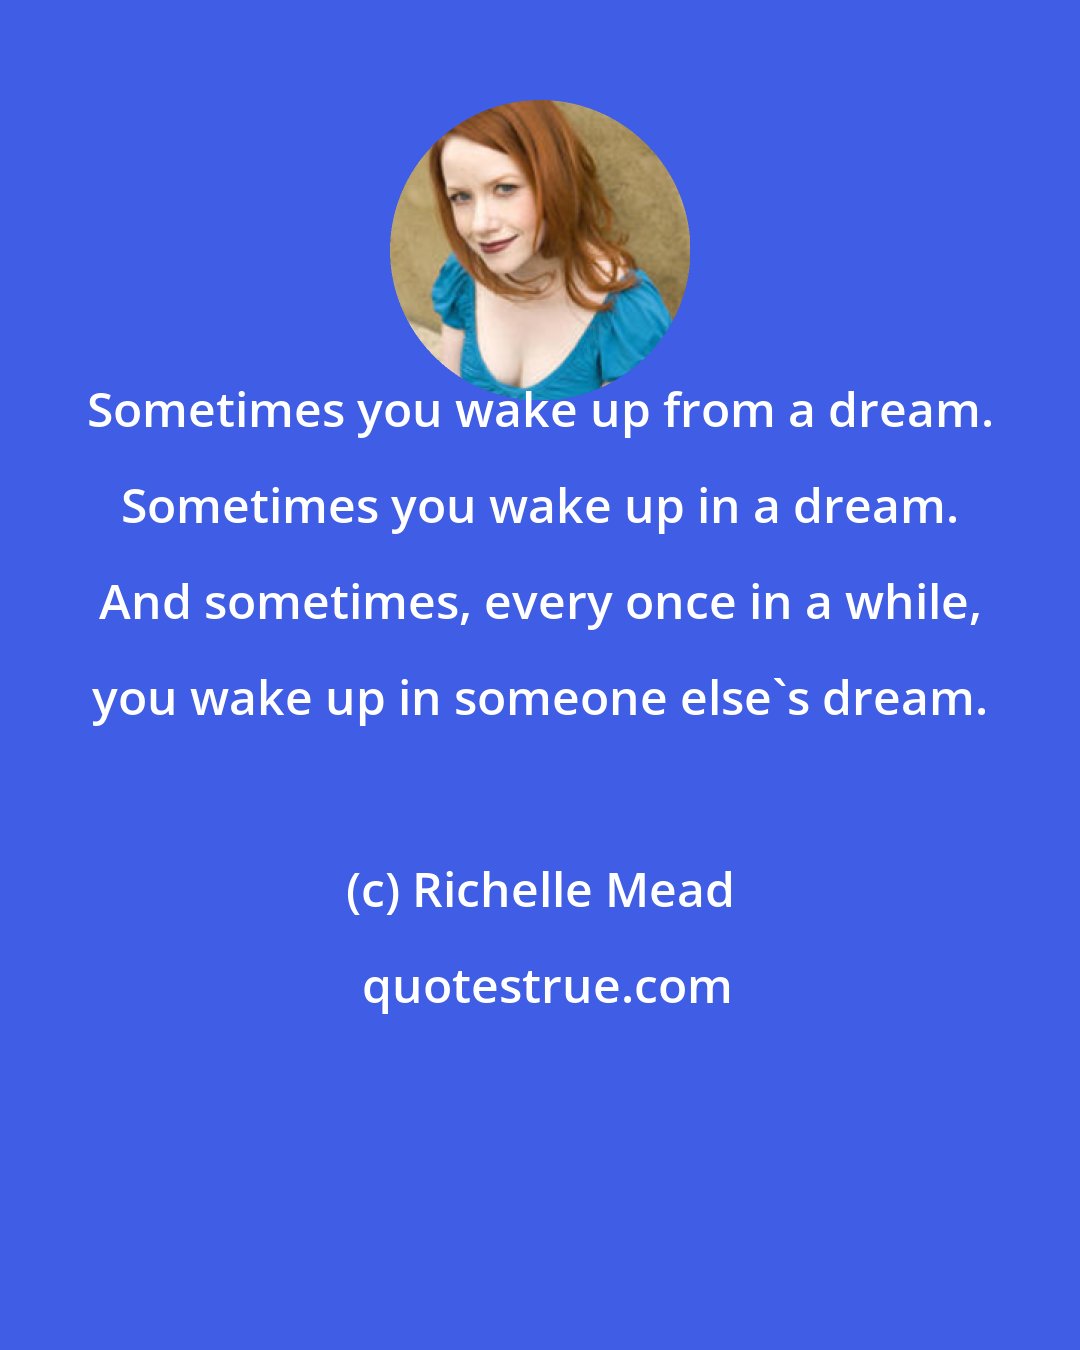 Richelle Mead: Sometimes you wake up from a dream. Sometimes you wake up in a dream. And sometimes, every once in a while, you wake up in someone else's dream.